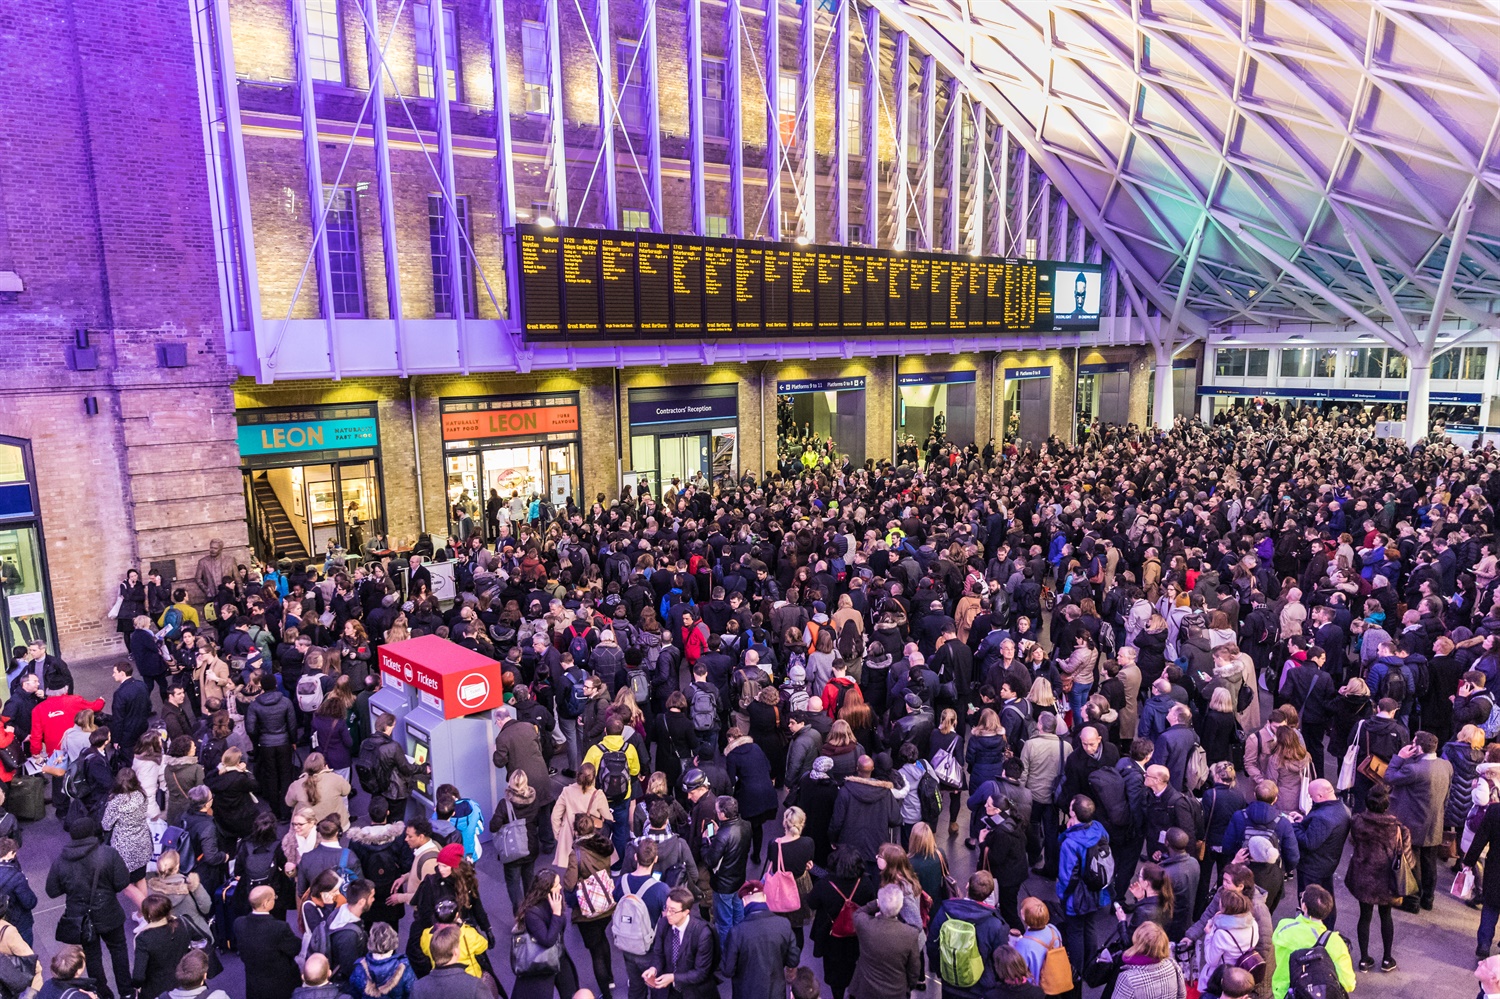 Timetable chaos: Rail industry ‘lacks courage’ to say no to impossible demands